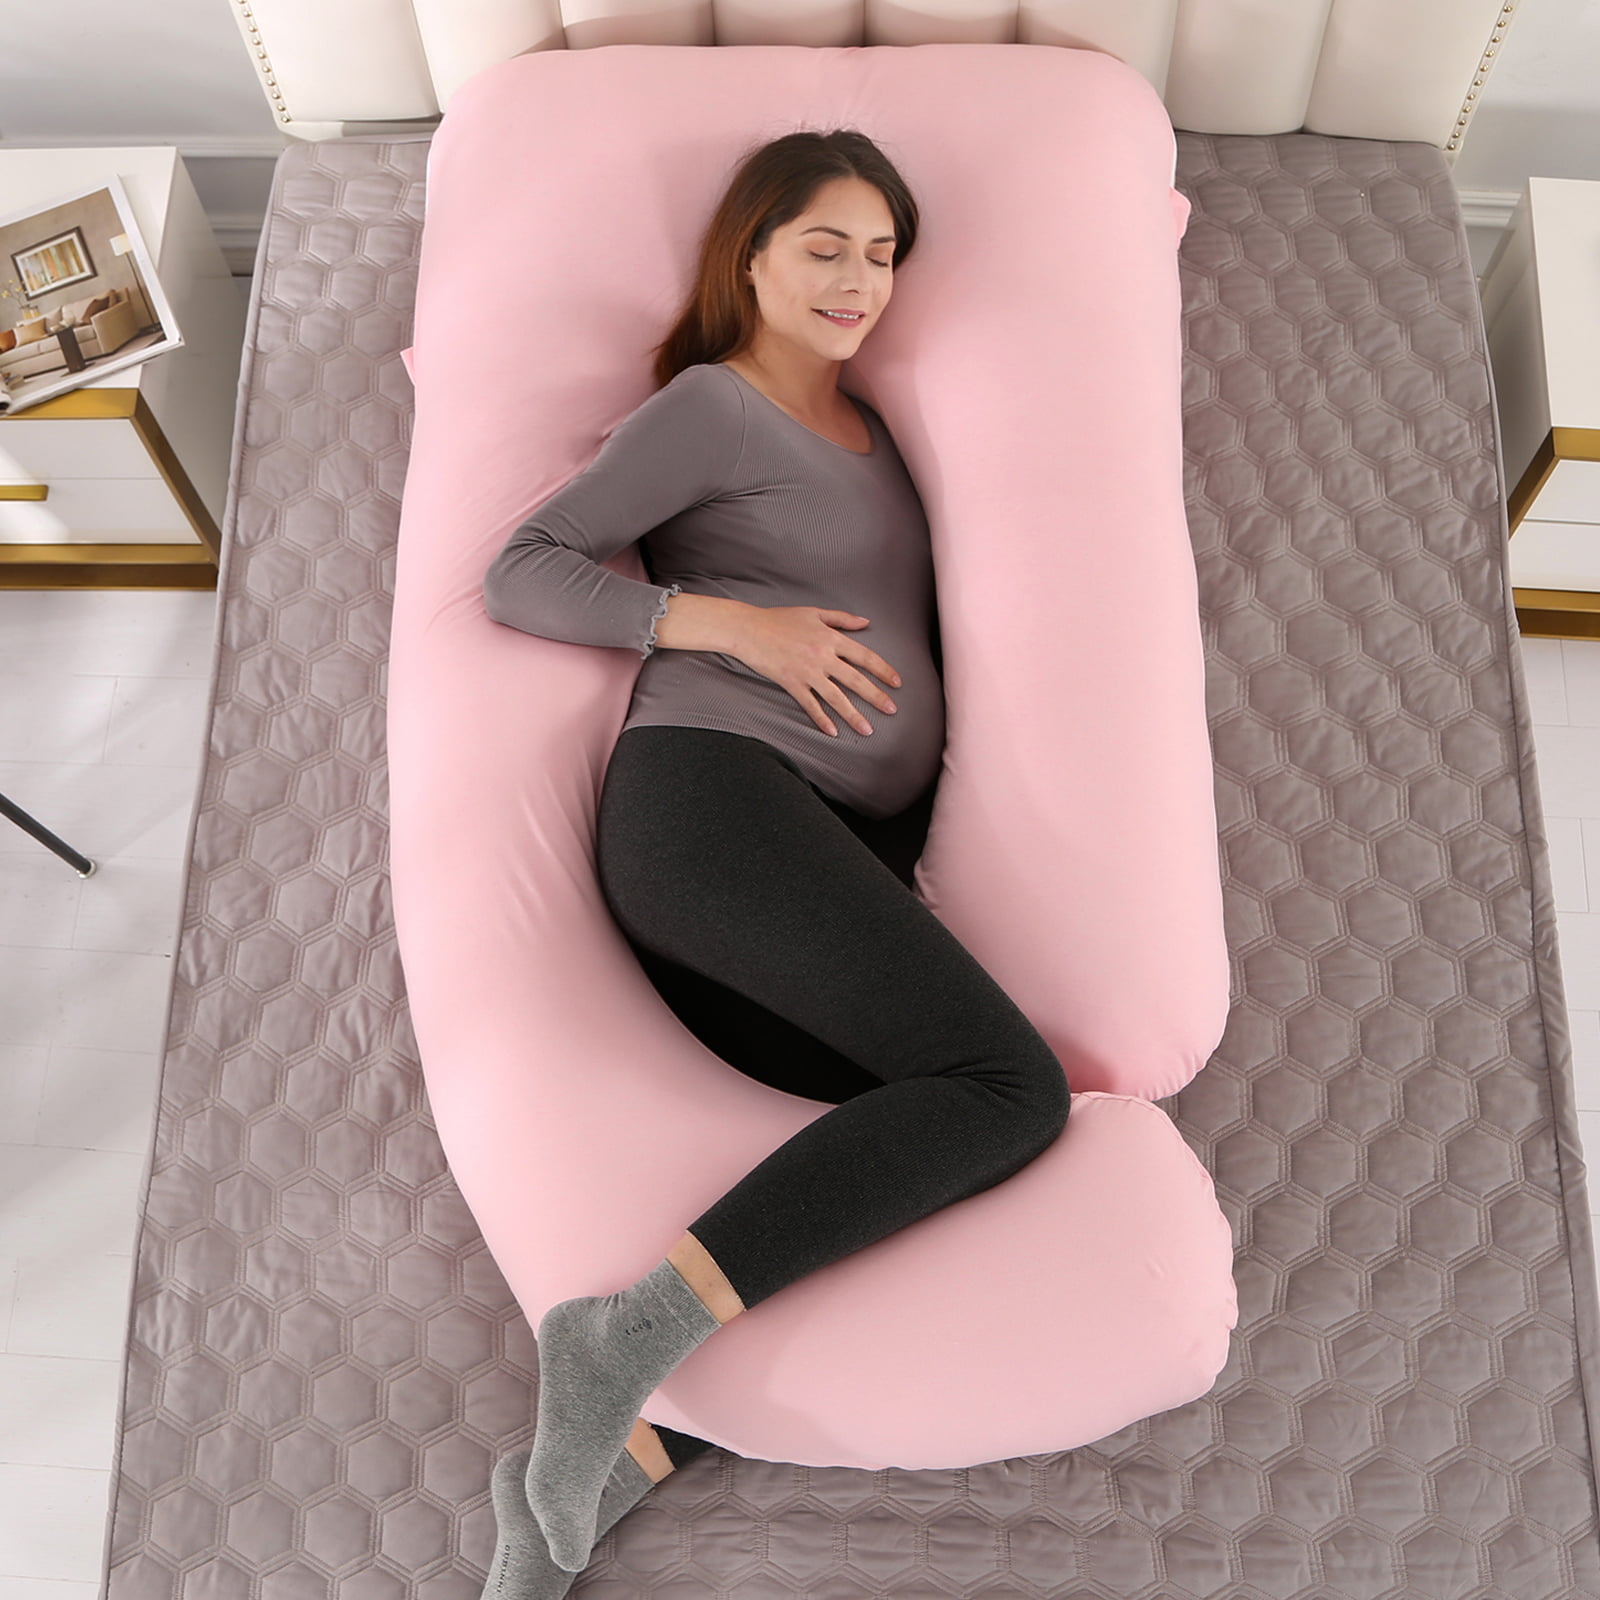 Pregnancy Pillow for Side Sleeper Waist Back Support,Detachable and Removable Pillowcase,Easy to Clean Side Sleeping Pillow for Belly Double Wedge Pillow for Maternity